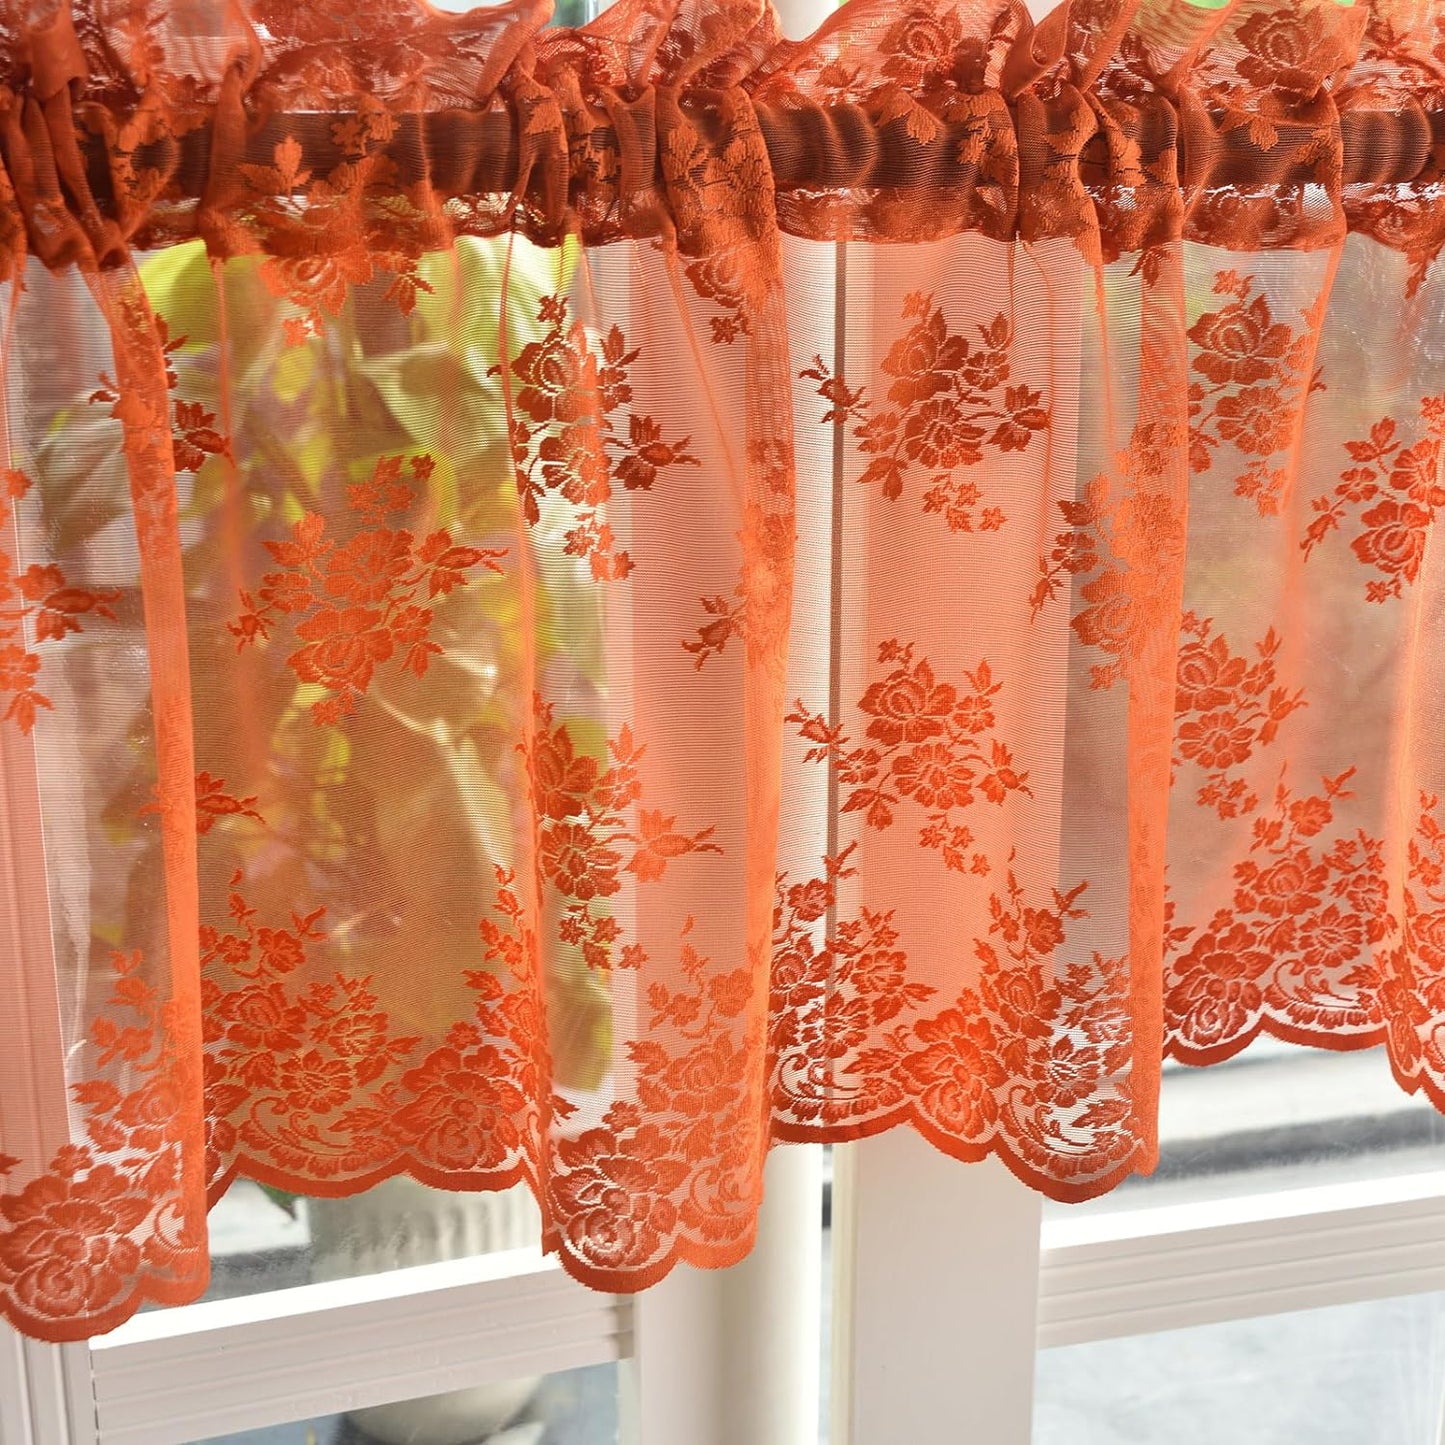 Kotile Sage Green Sheer Valance Curtain for Windows, Rustic Floral Spring Sheer Window Valance Curtain 18 Inch Length, Light Filtering Rod Pocket Lace Valance, 52 X 18 Inch, 1 Panel, Sage Green  Kotile Textile Burnt Orange 52 In X 18 In (W X L) 